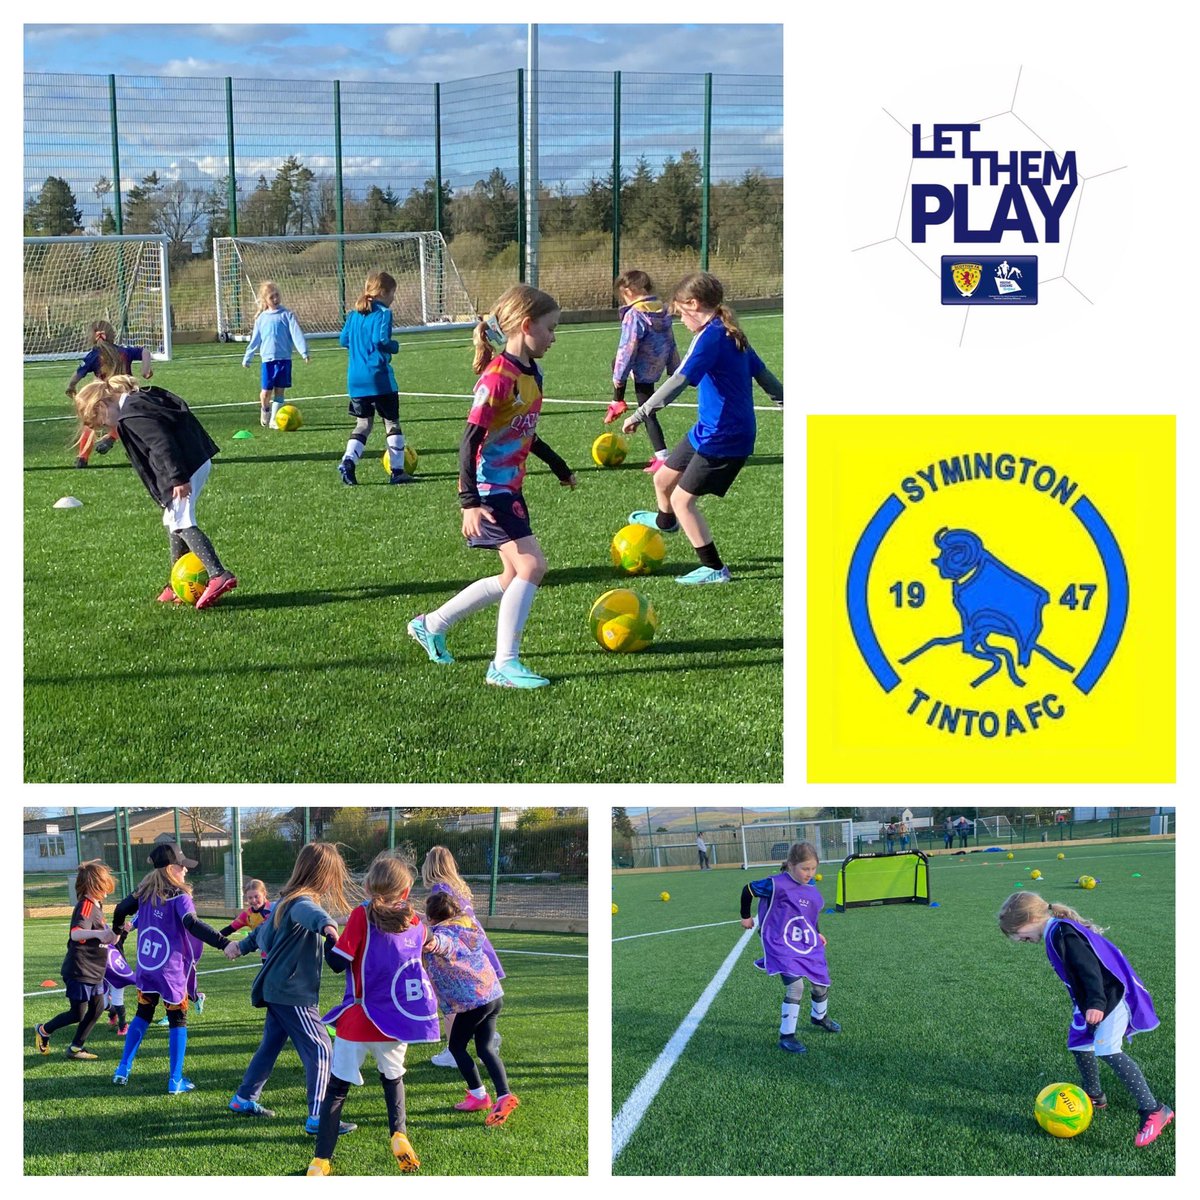 #PowerOfFootball | A great night with the @SymTinto Girls 👍🏼⚽️☀️ Activation games, moving with the ⚽️, fun passing challenges, 1v1’s and games 🤩👏🏼 A night full of activity, engagement & fun 🙏🏻❤️ Brilliant support, praise & enthusiasm from their coach, Richard 🙌🏼🔥 #LetThemPlay